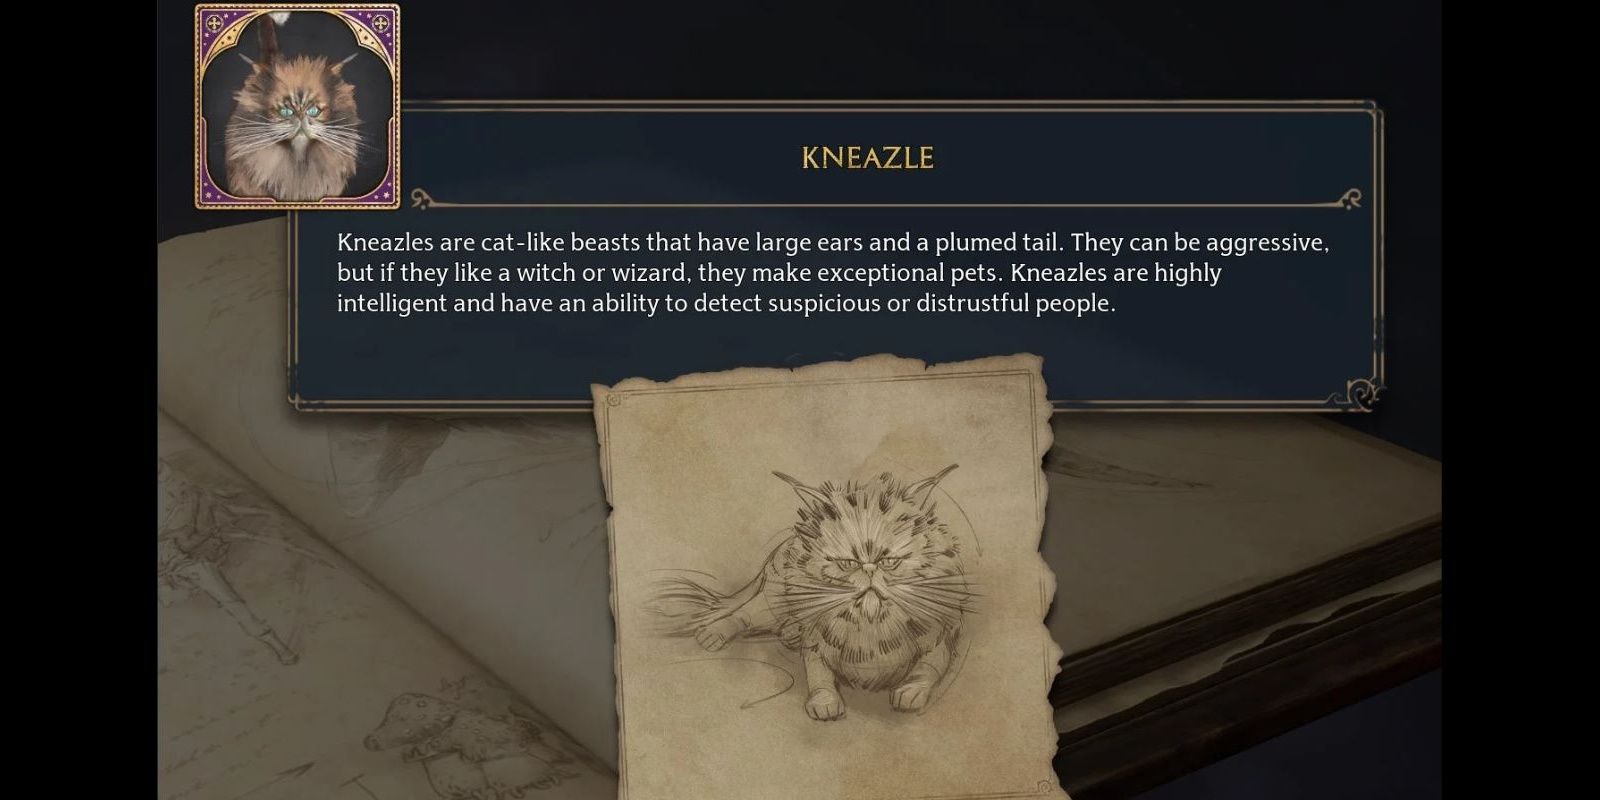 A Fact Page About The Kneazle in Hogwarts Legacy- says "Kneazles are cat-like beasts that have large ears and a plumed tail. They can be aggressive, but if they like a witch or wizard, they make exceptional pets. Kneazles are highly intelligent and have an ability to detect suspicious or distrustful people"